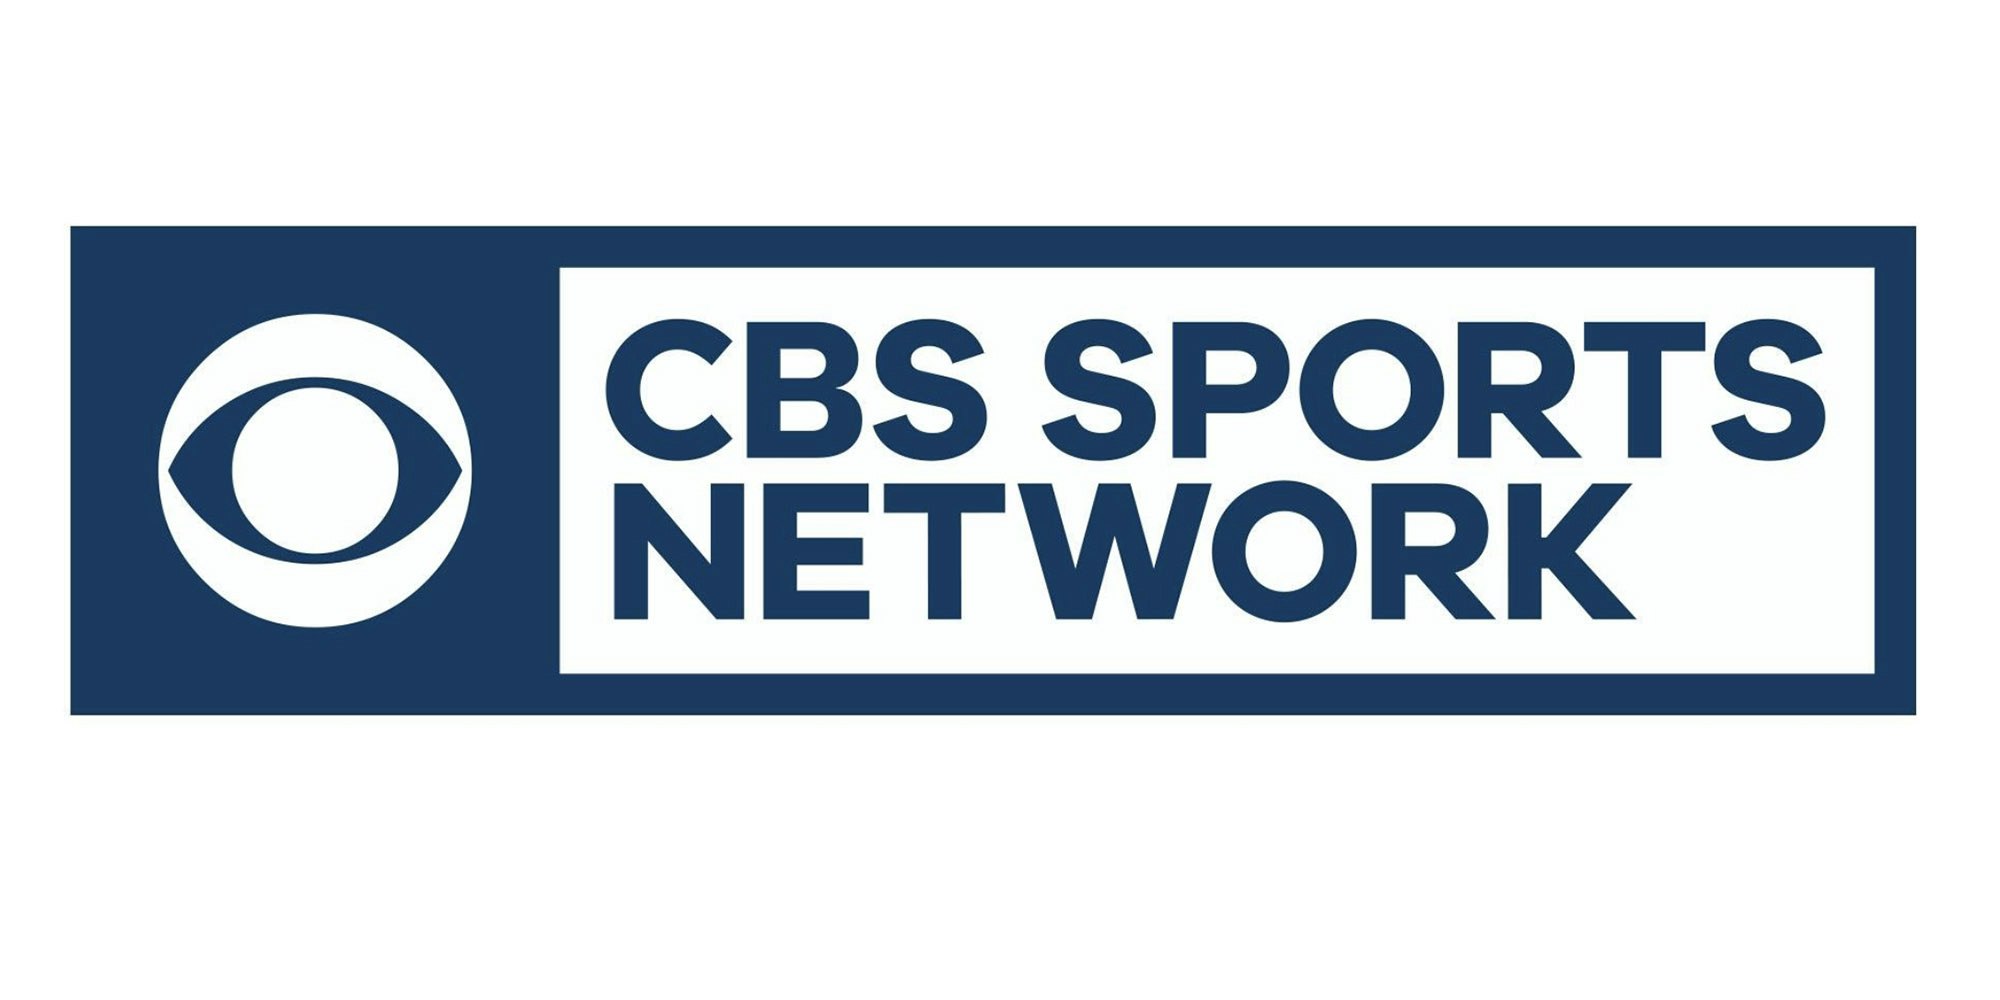 Stream CBS Sports Network Live How to Watch CBS Sports Network